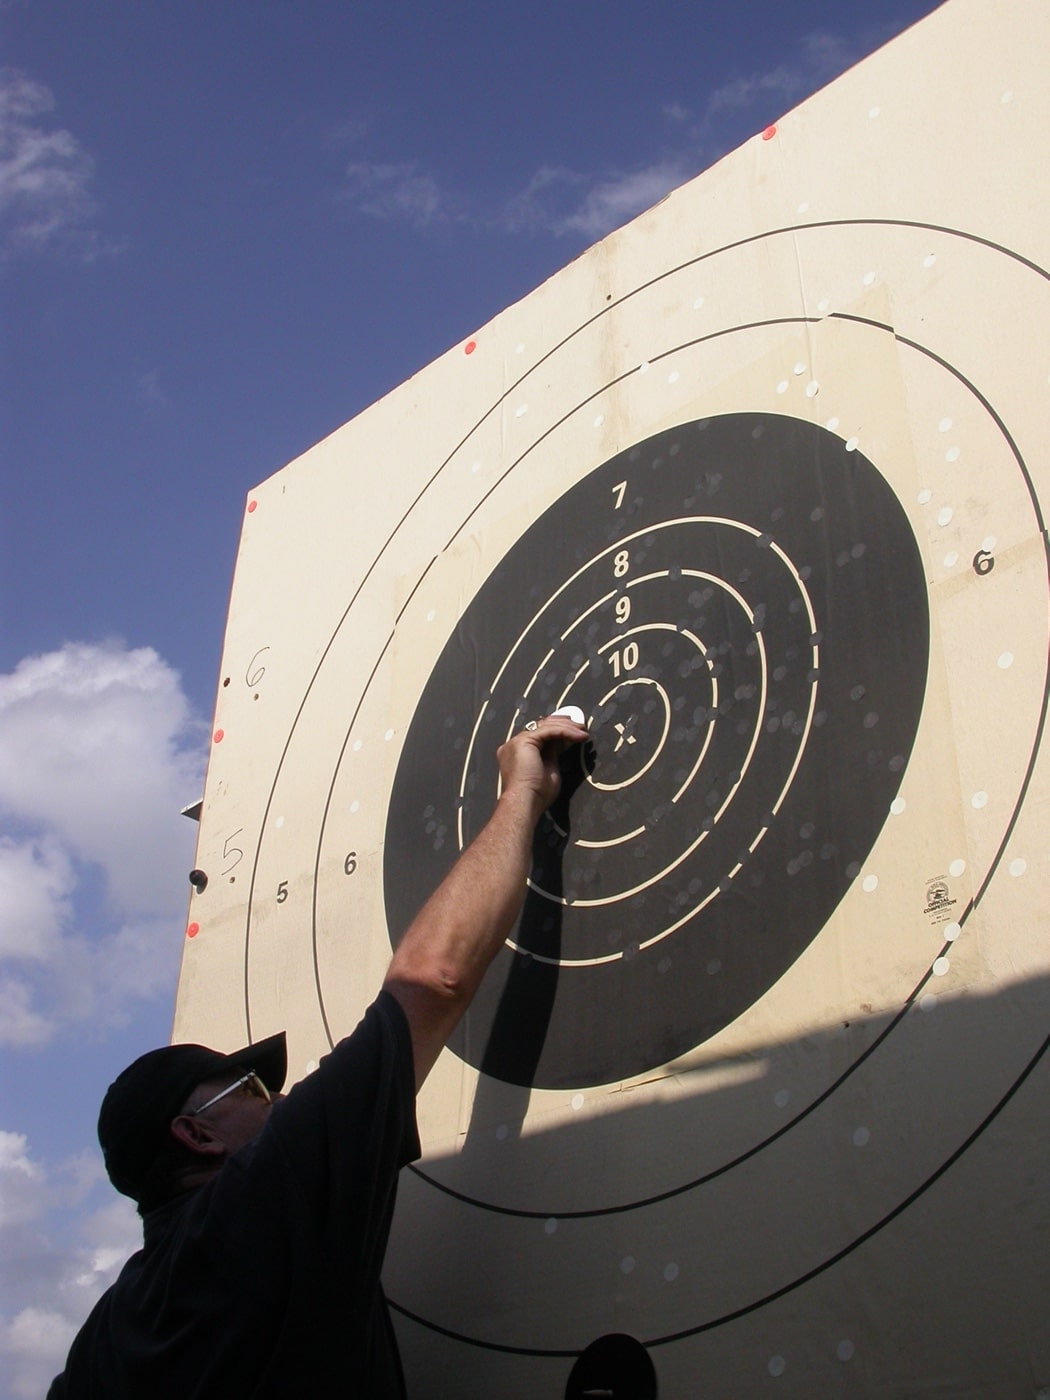 In this photograph, we see a bullseye type shooting target being used by the author to sight in his telescopic sight with a load of Sierra Bullets at the shooting range. These loads use hollow point ammo and provide excellent accuracy and precision.